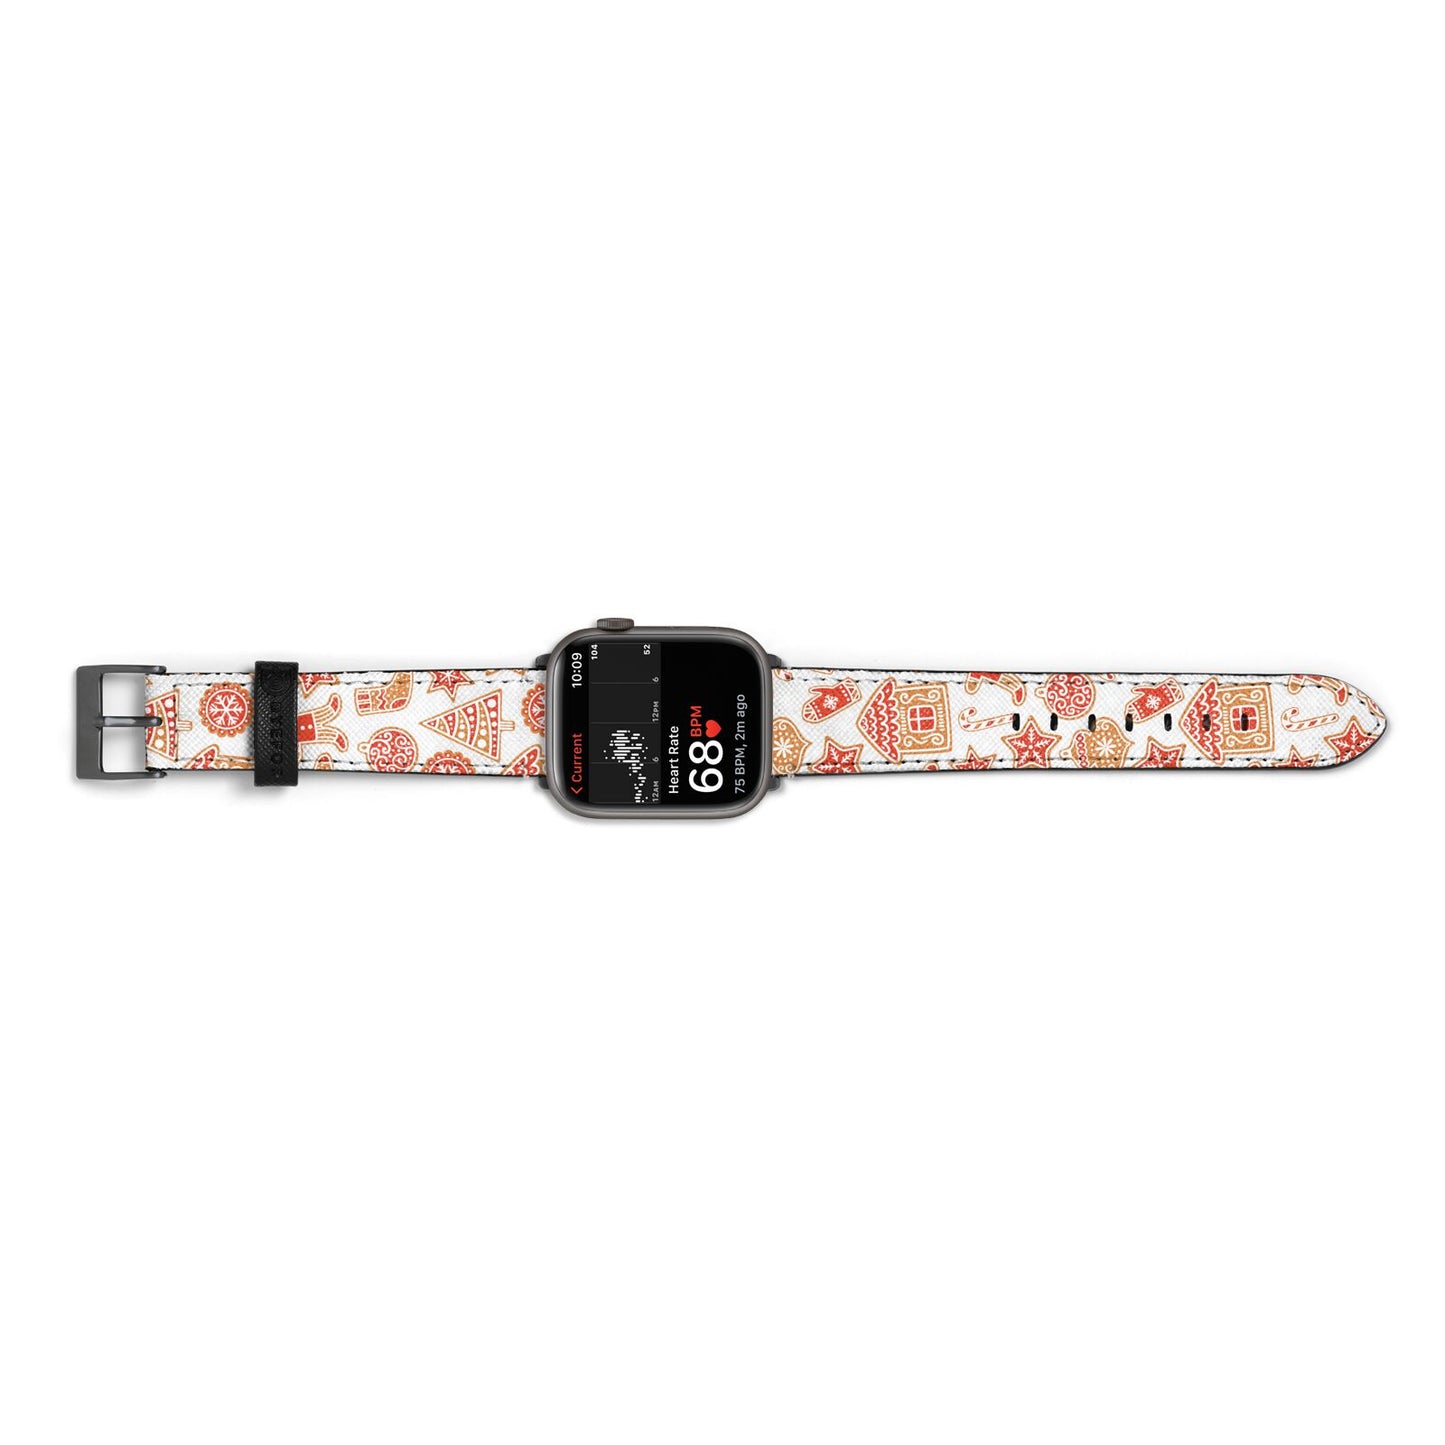 Christmas Gingerbread Apple Watch Strap Size 38mm Landscape Image Space Grey Hardware